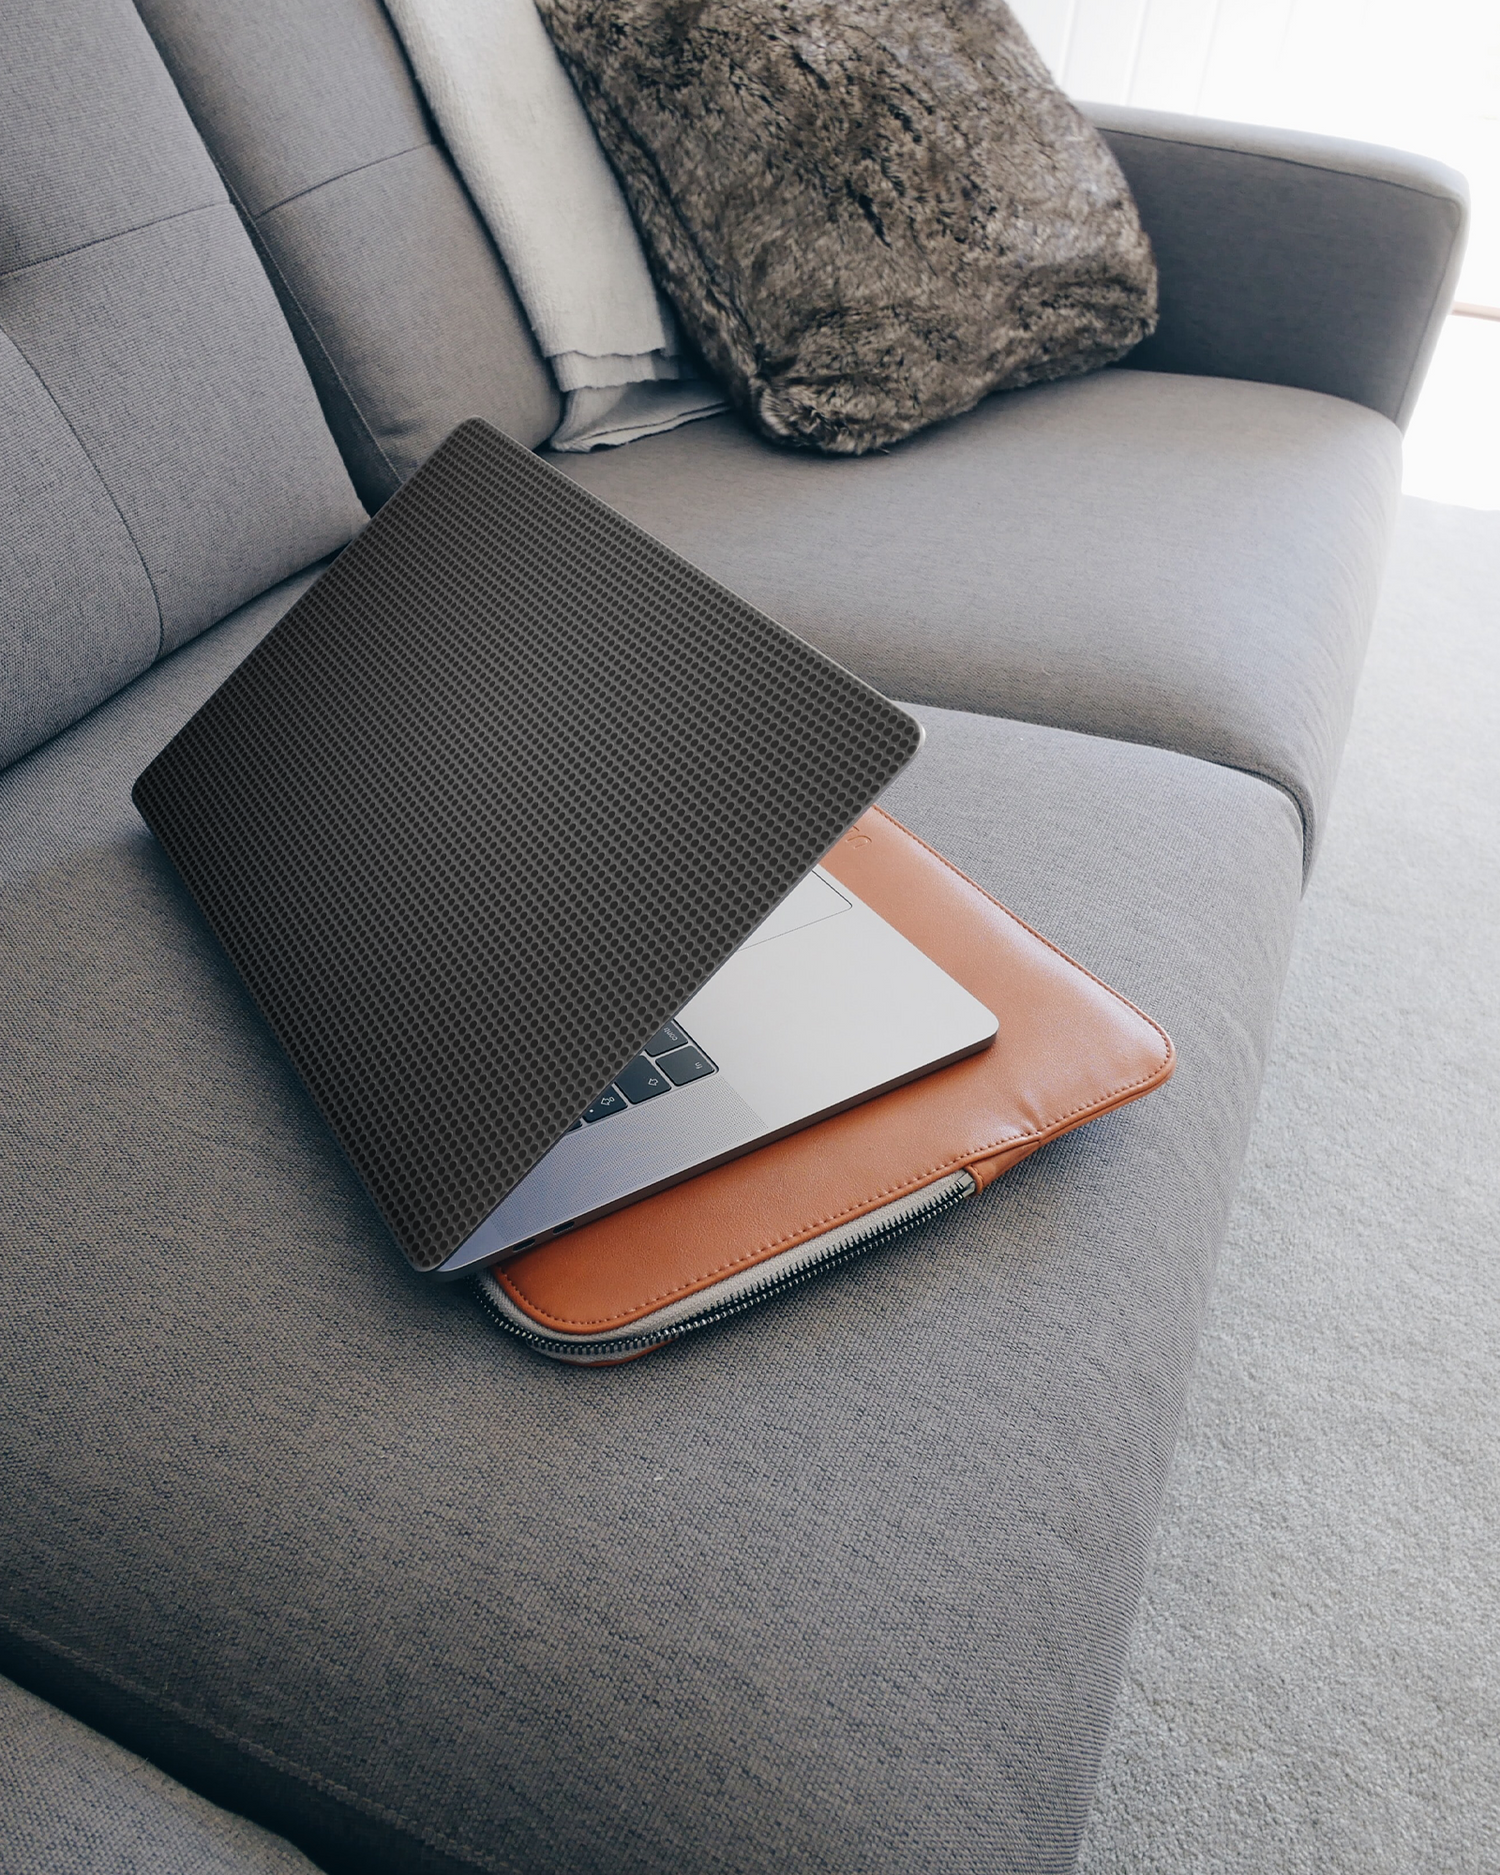 Carbon II Laptop Skin for 15 inch Apple MacBooks on a couch